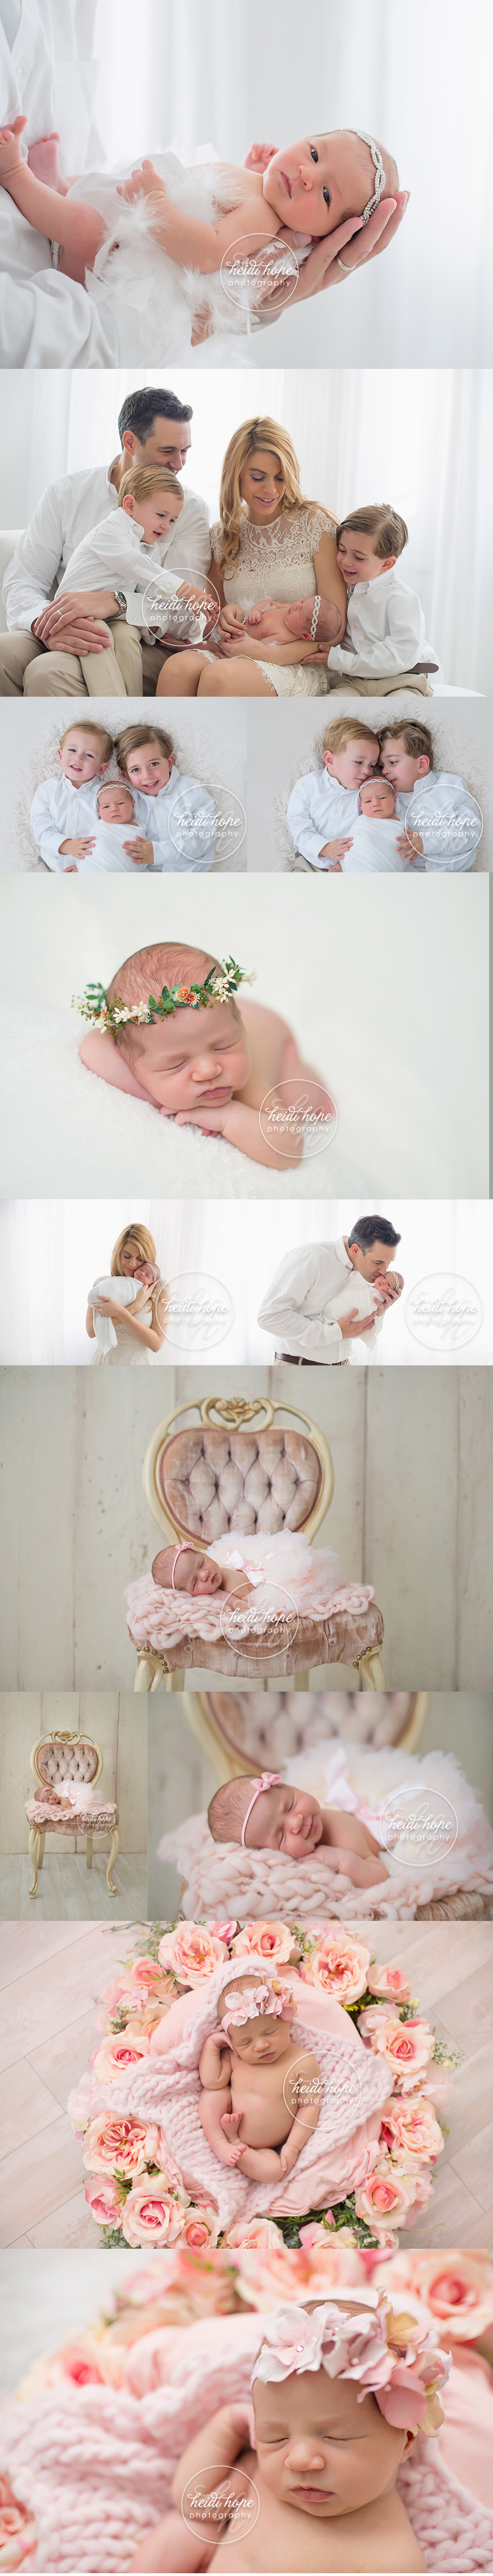 newborn-baby-girl-princess-in-the-flowers-with-big-brothers-by-rhode-island-newborn-photographer